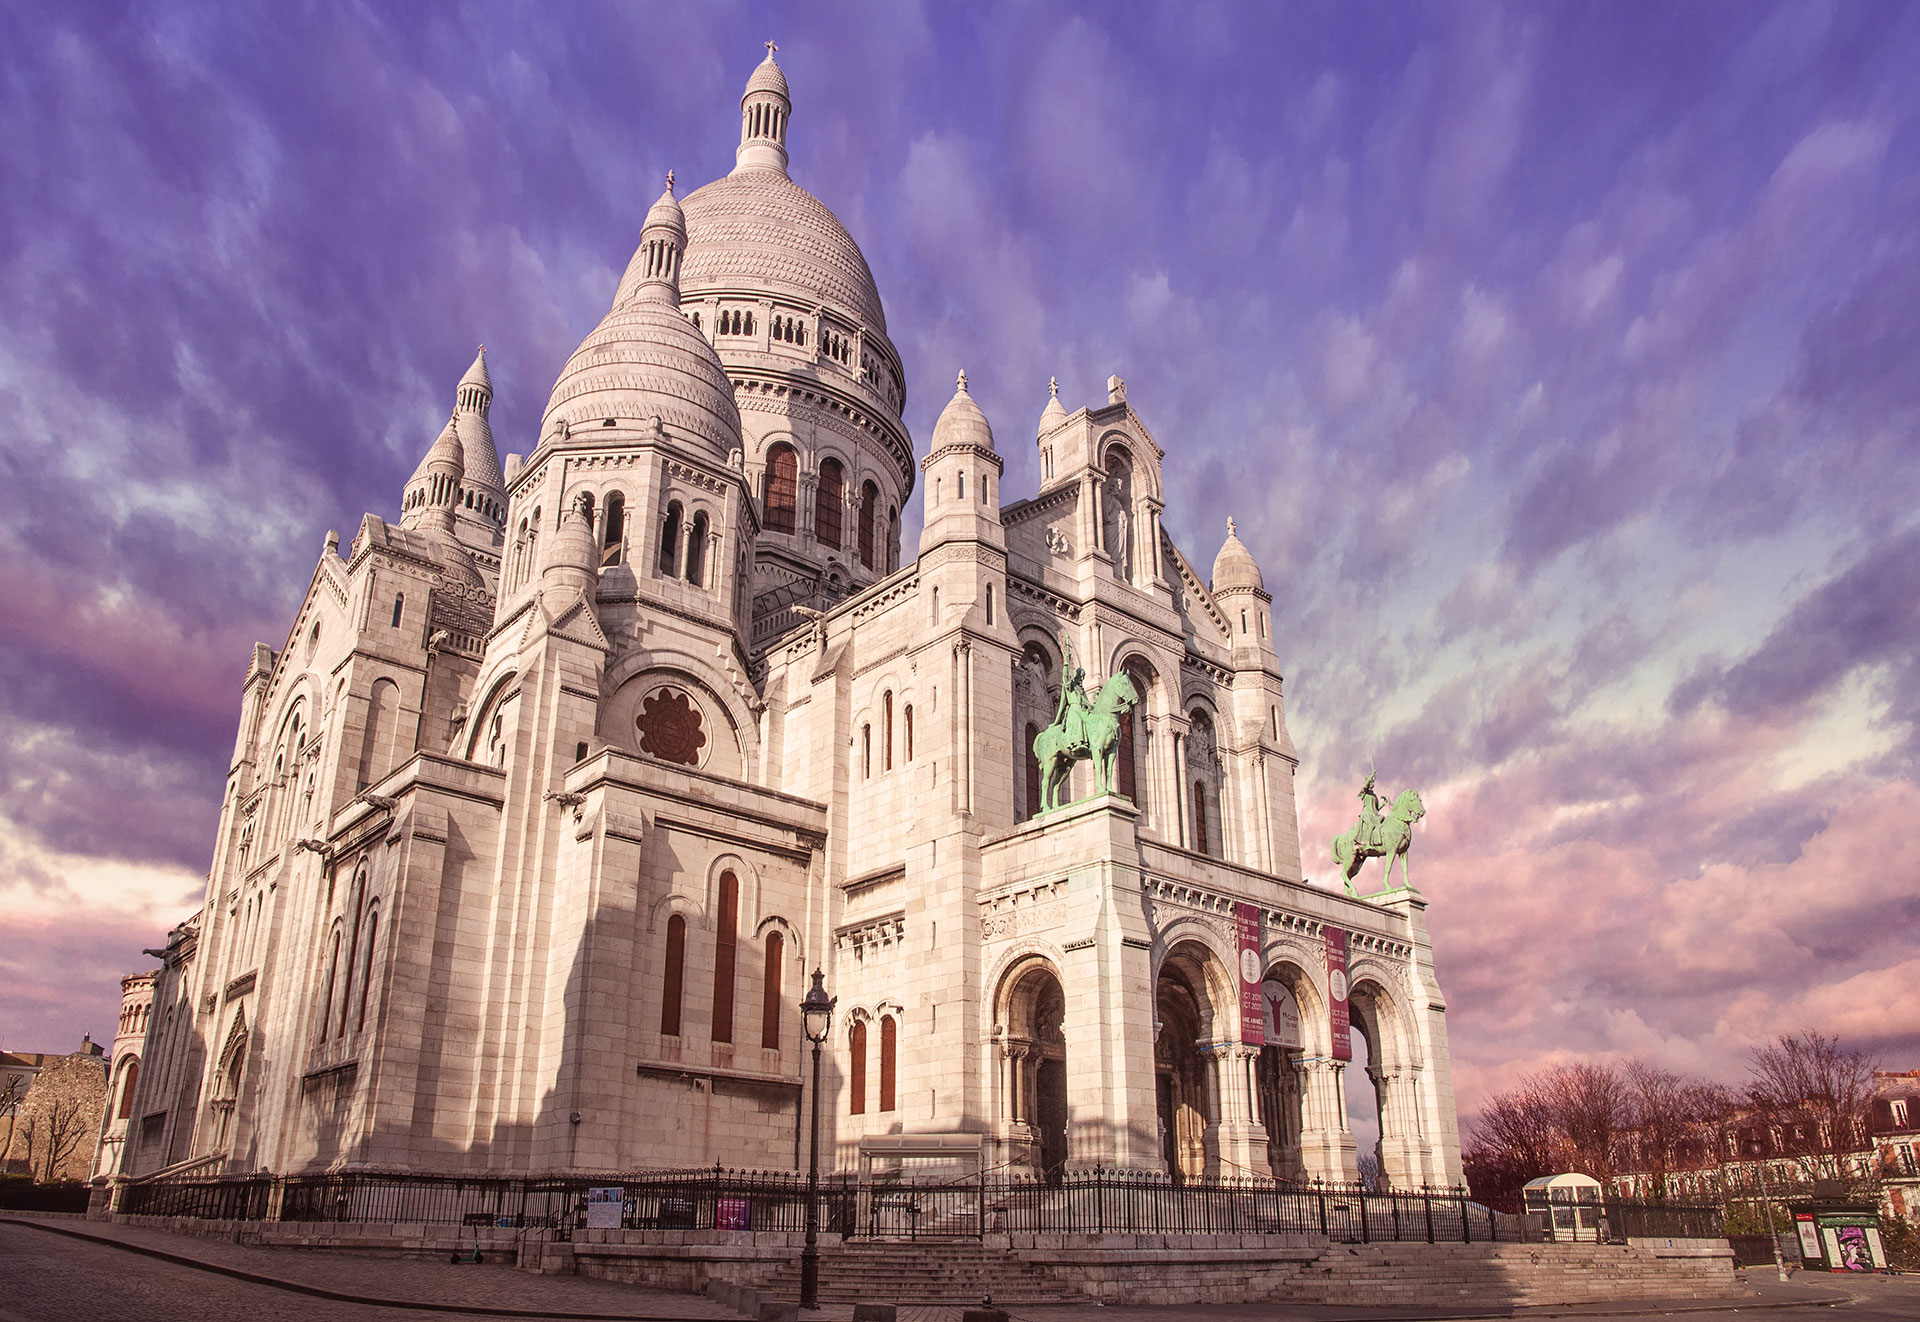 The Basilique du Sacre Coeur in Paris Montmartre without anybody around because of the quarantine due to the Coronavirus COVID-19 2020. Also with a nice purple sunset burning sky, (Nos Dren)